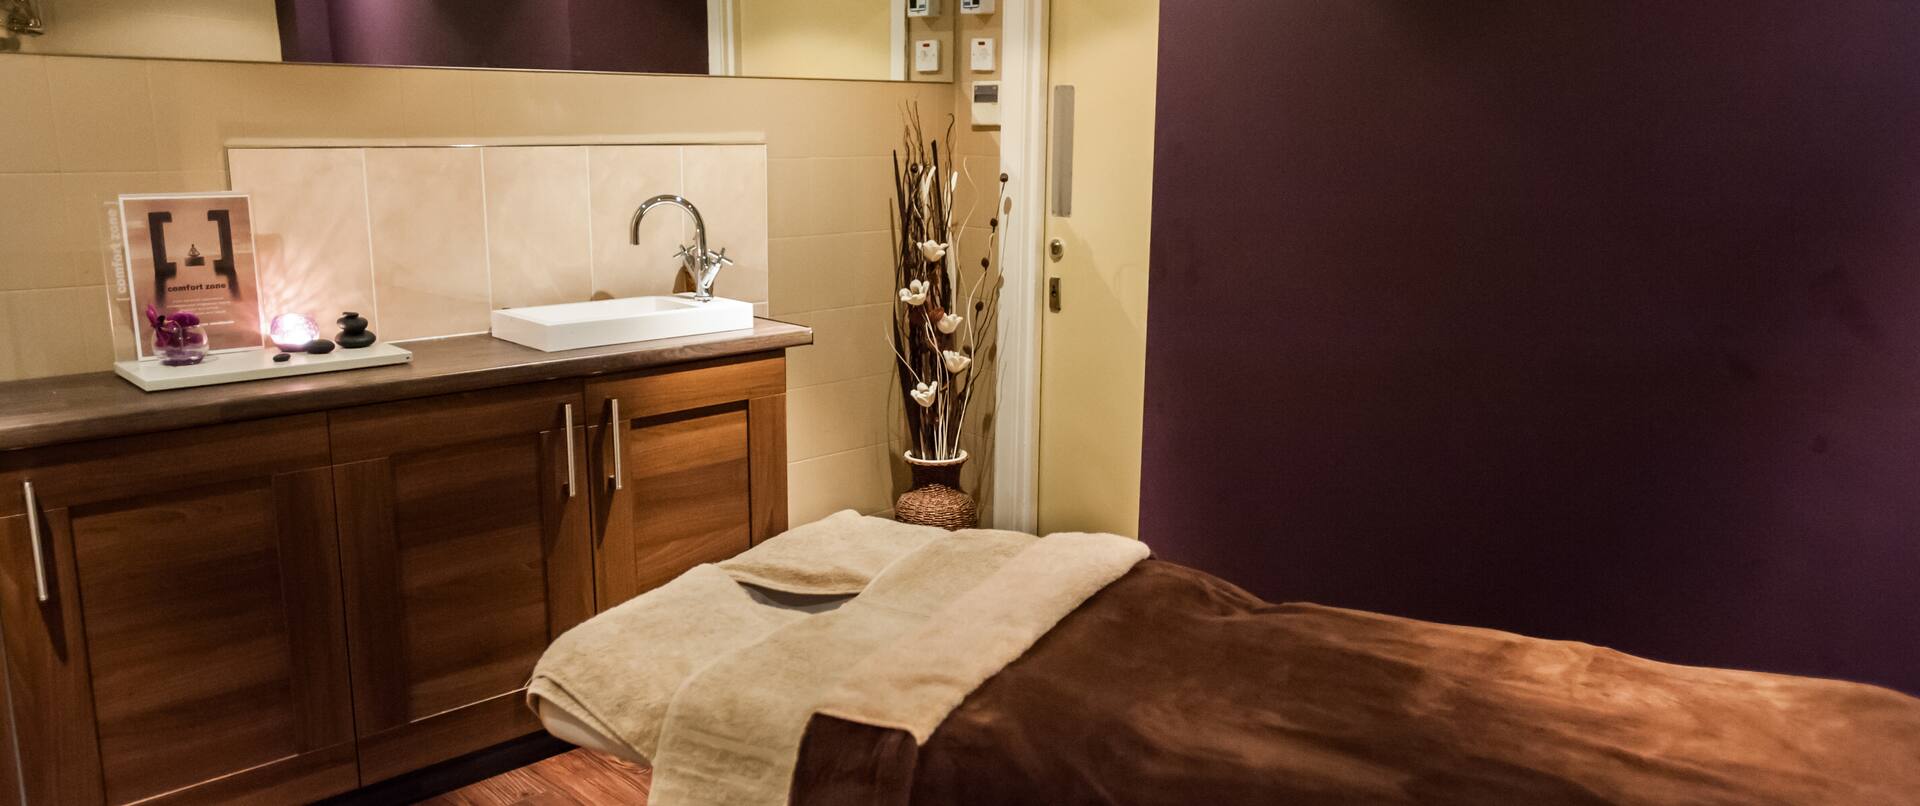 Relaxing treatment rooms